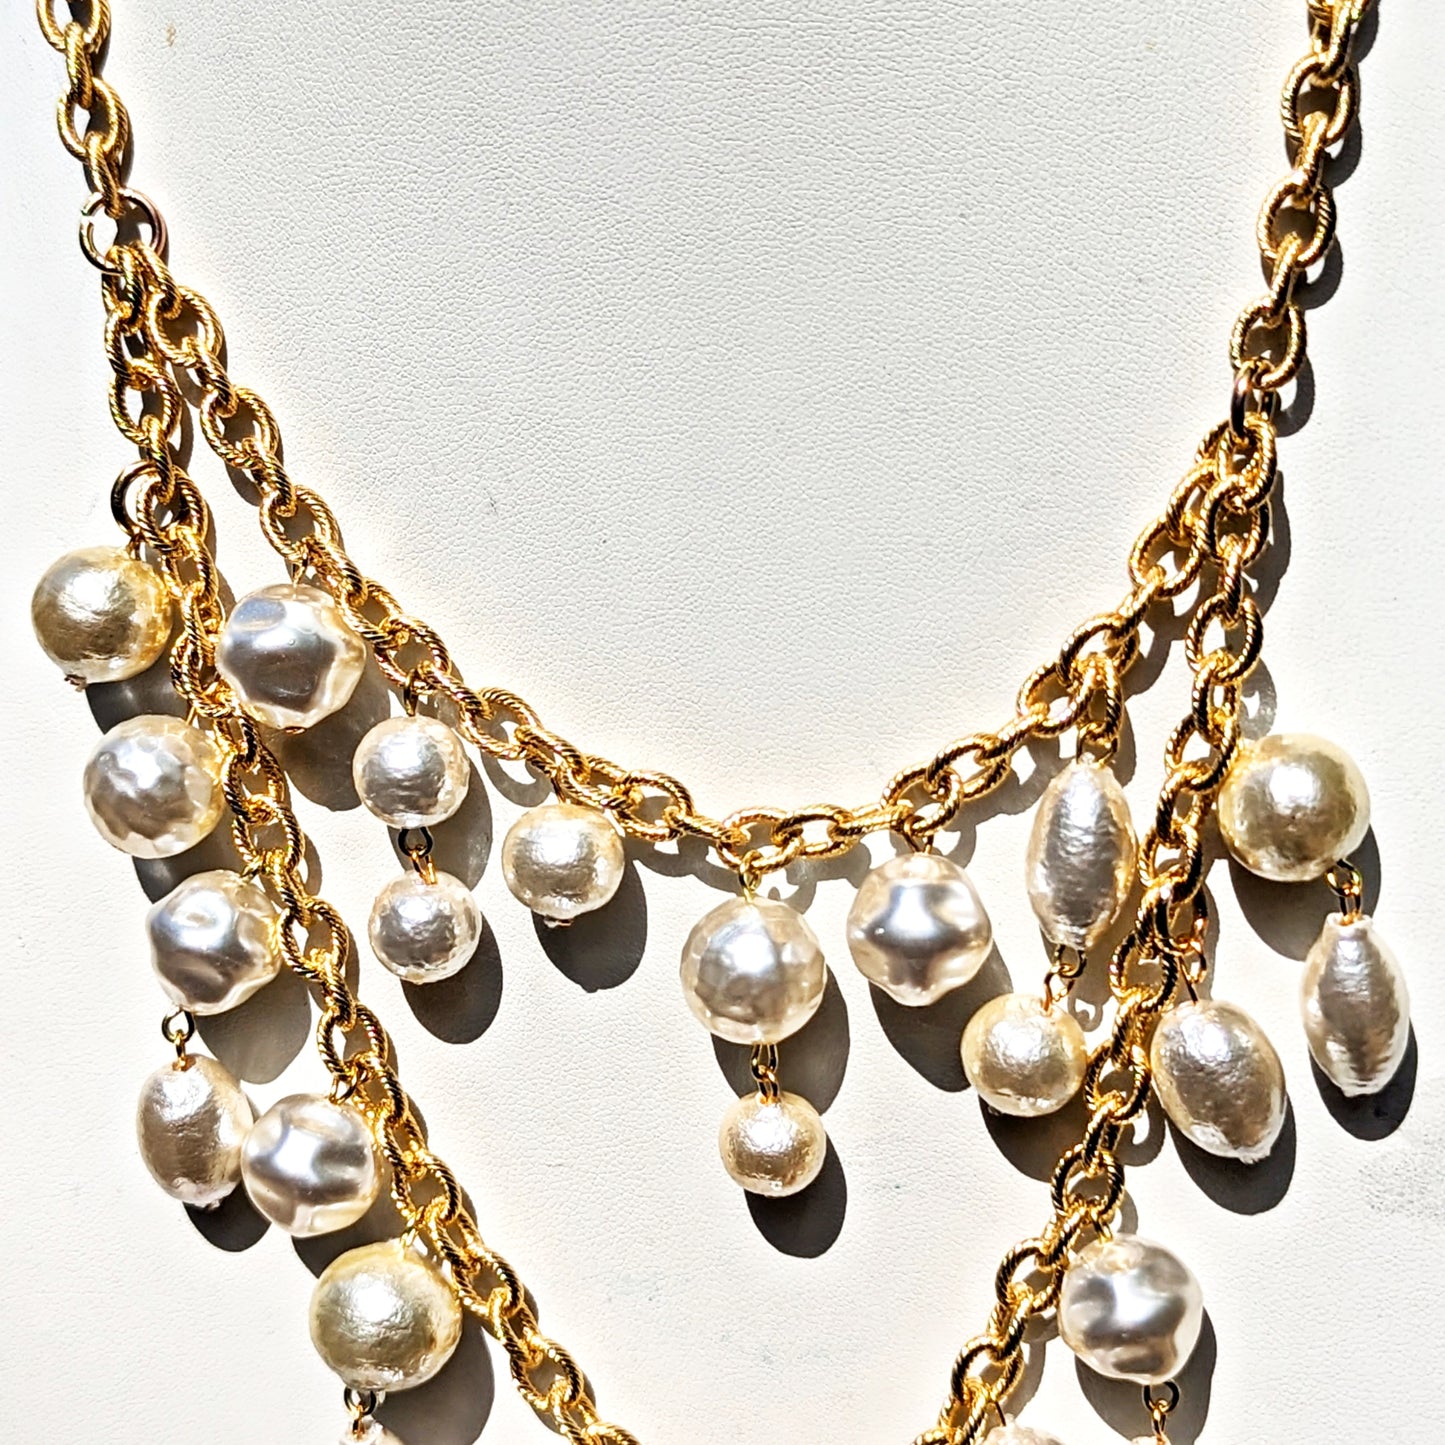 Handlinked Vintage 2 Strands Pearls Gold Textured chain 20 adjustable inches US Made Gold Lobster Claw Handmade Sugar Gay Isber